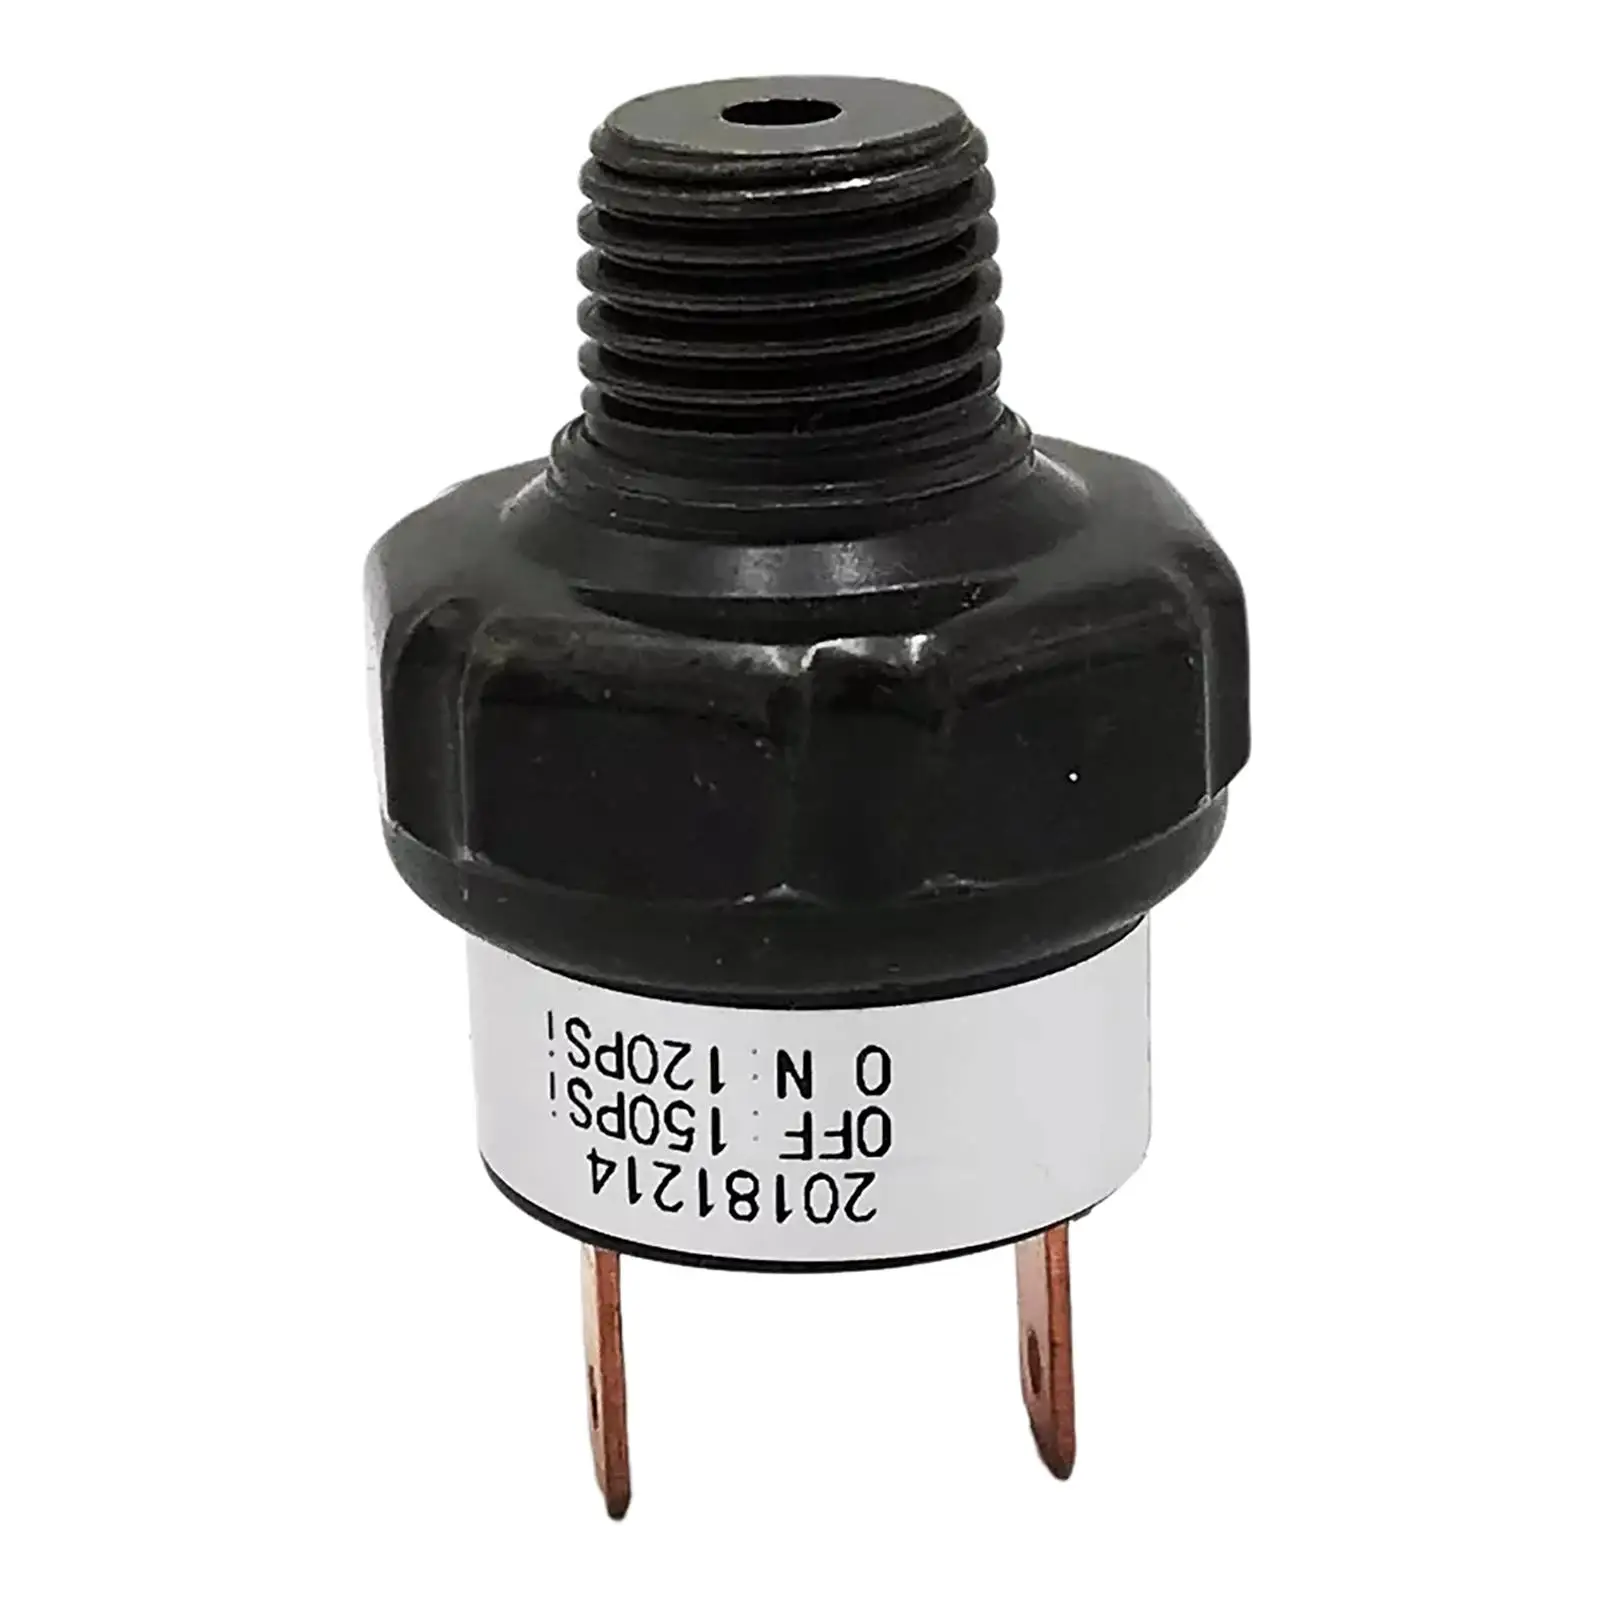 Air Compressor Control Switch Heavy Duty 12V Stainless Steel Precision Pressure Switch Valve for Air Horn Pump Regulator